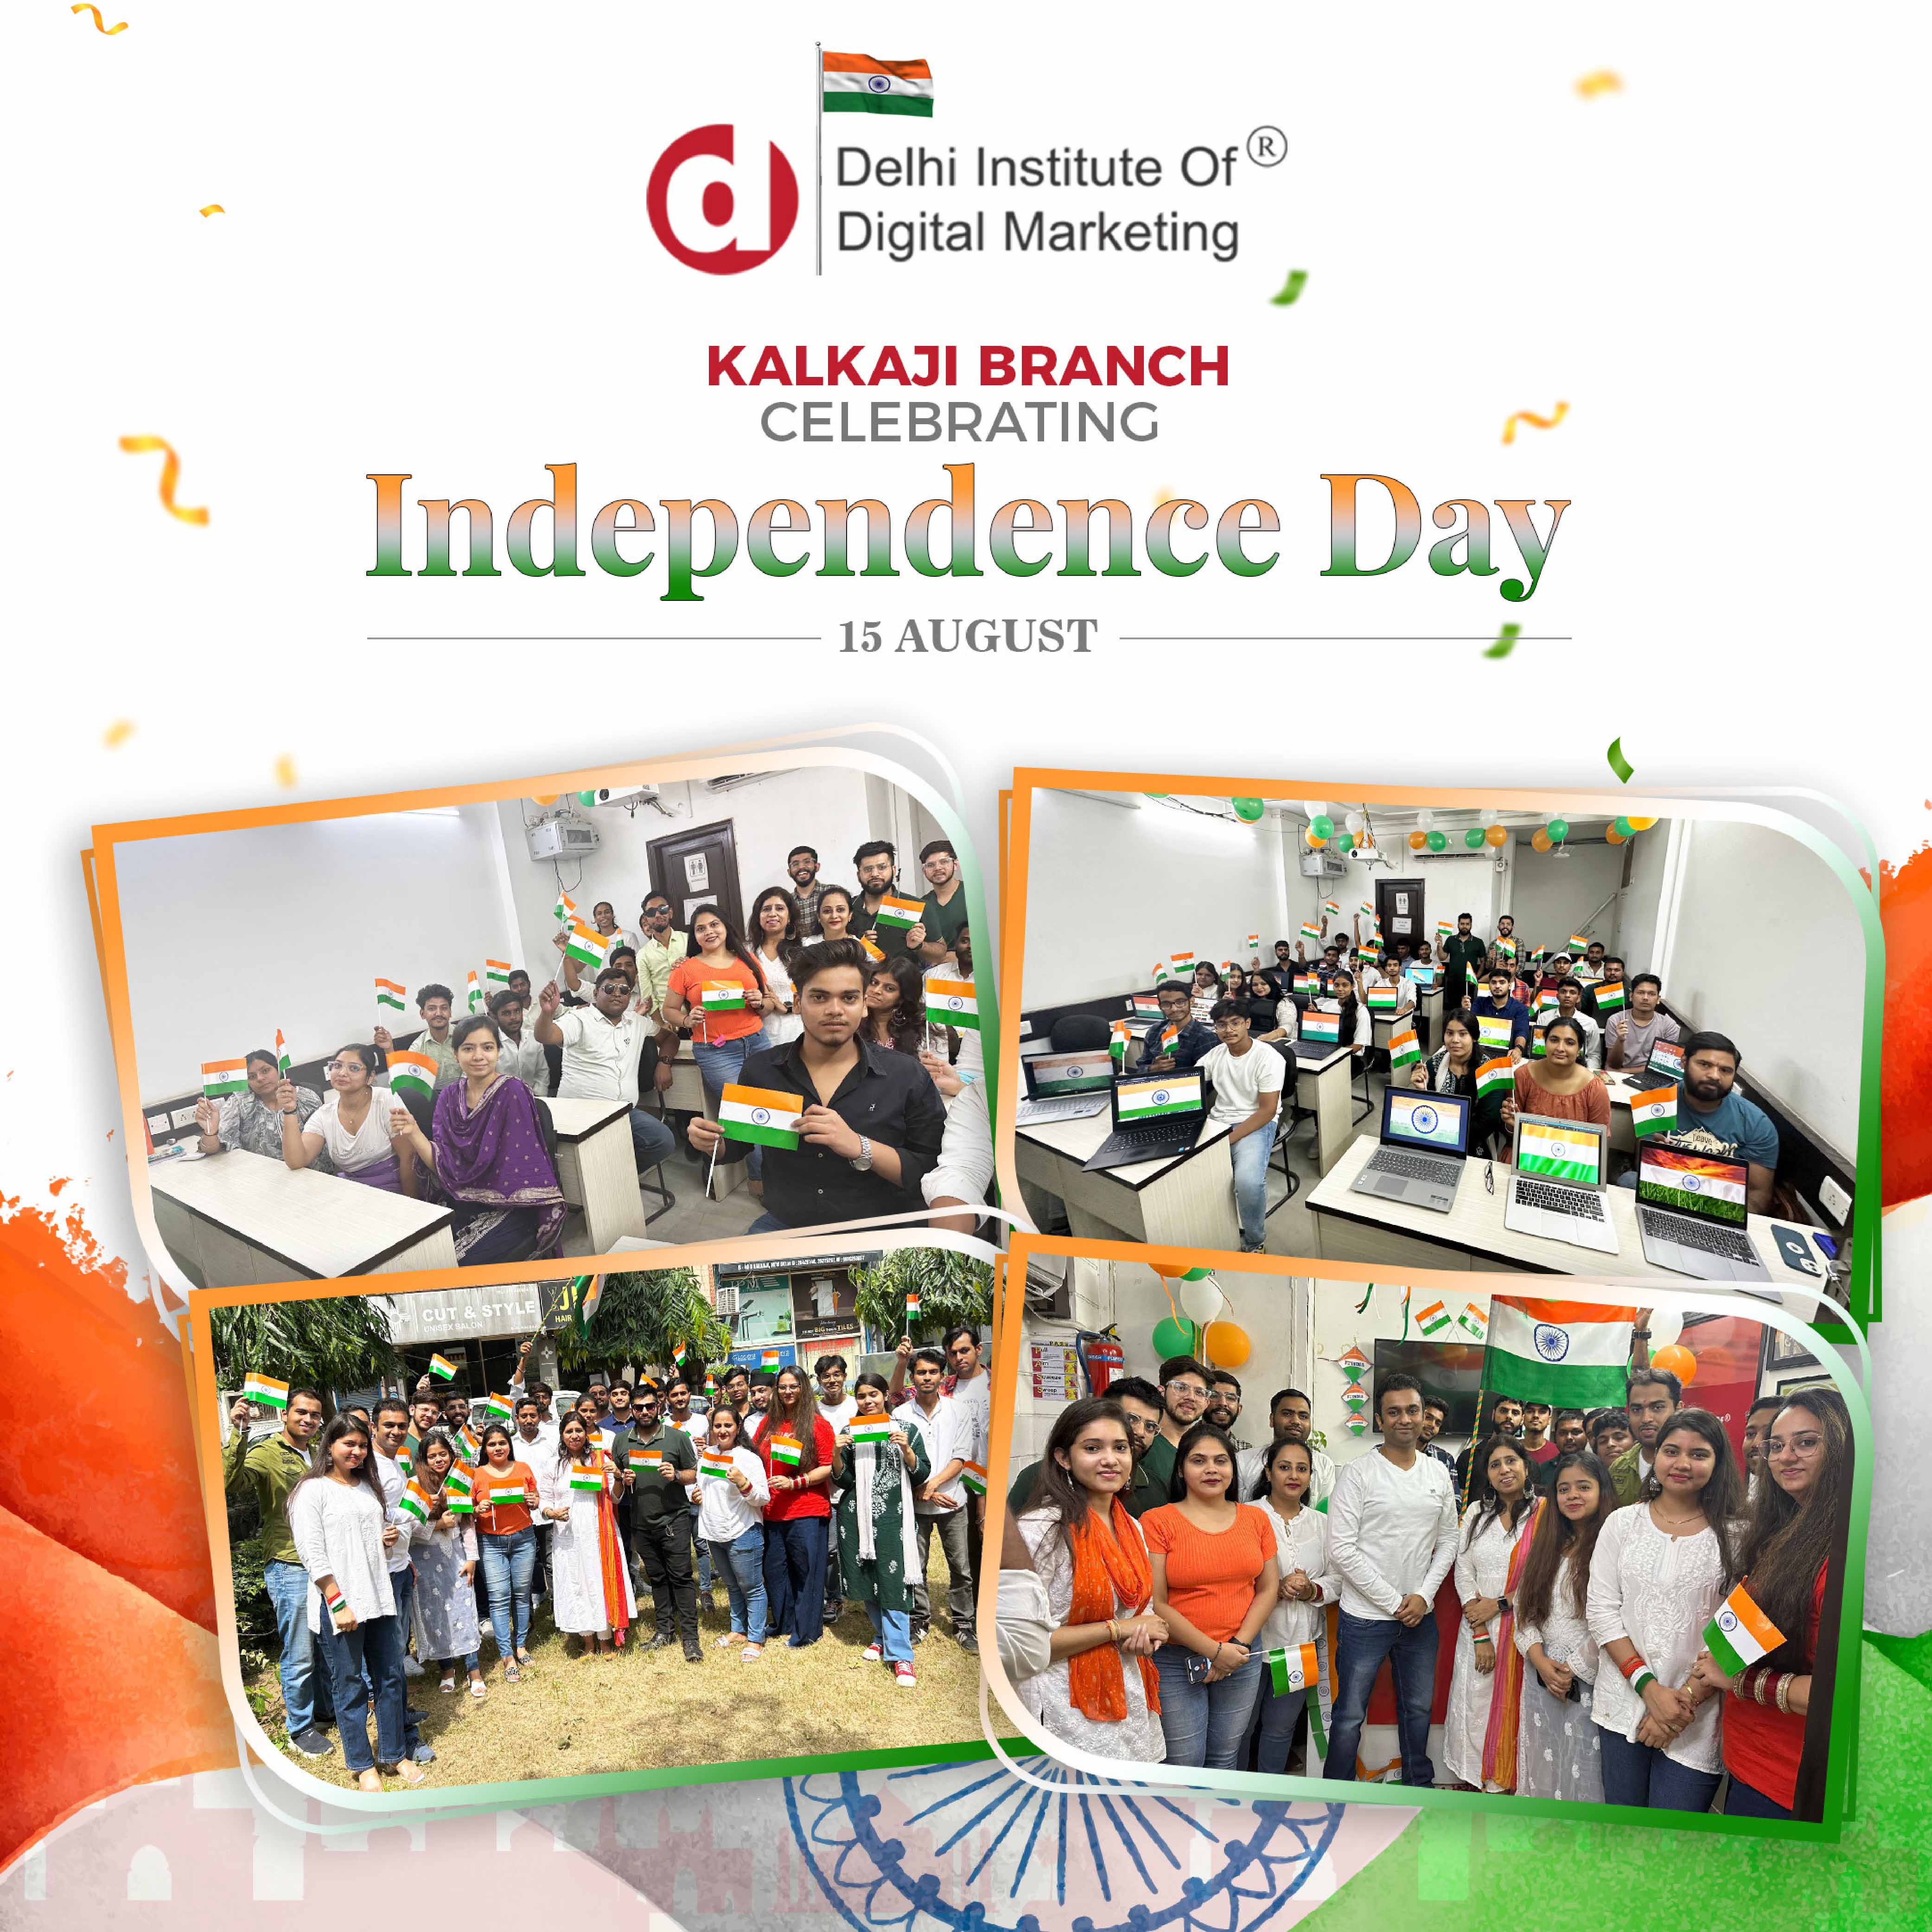 DIDM Kalkaji Branch is celebrating its 77th Independence Day